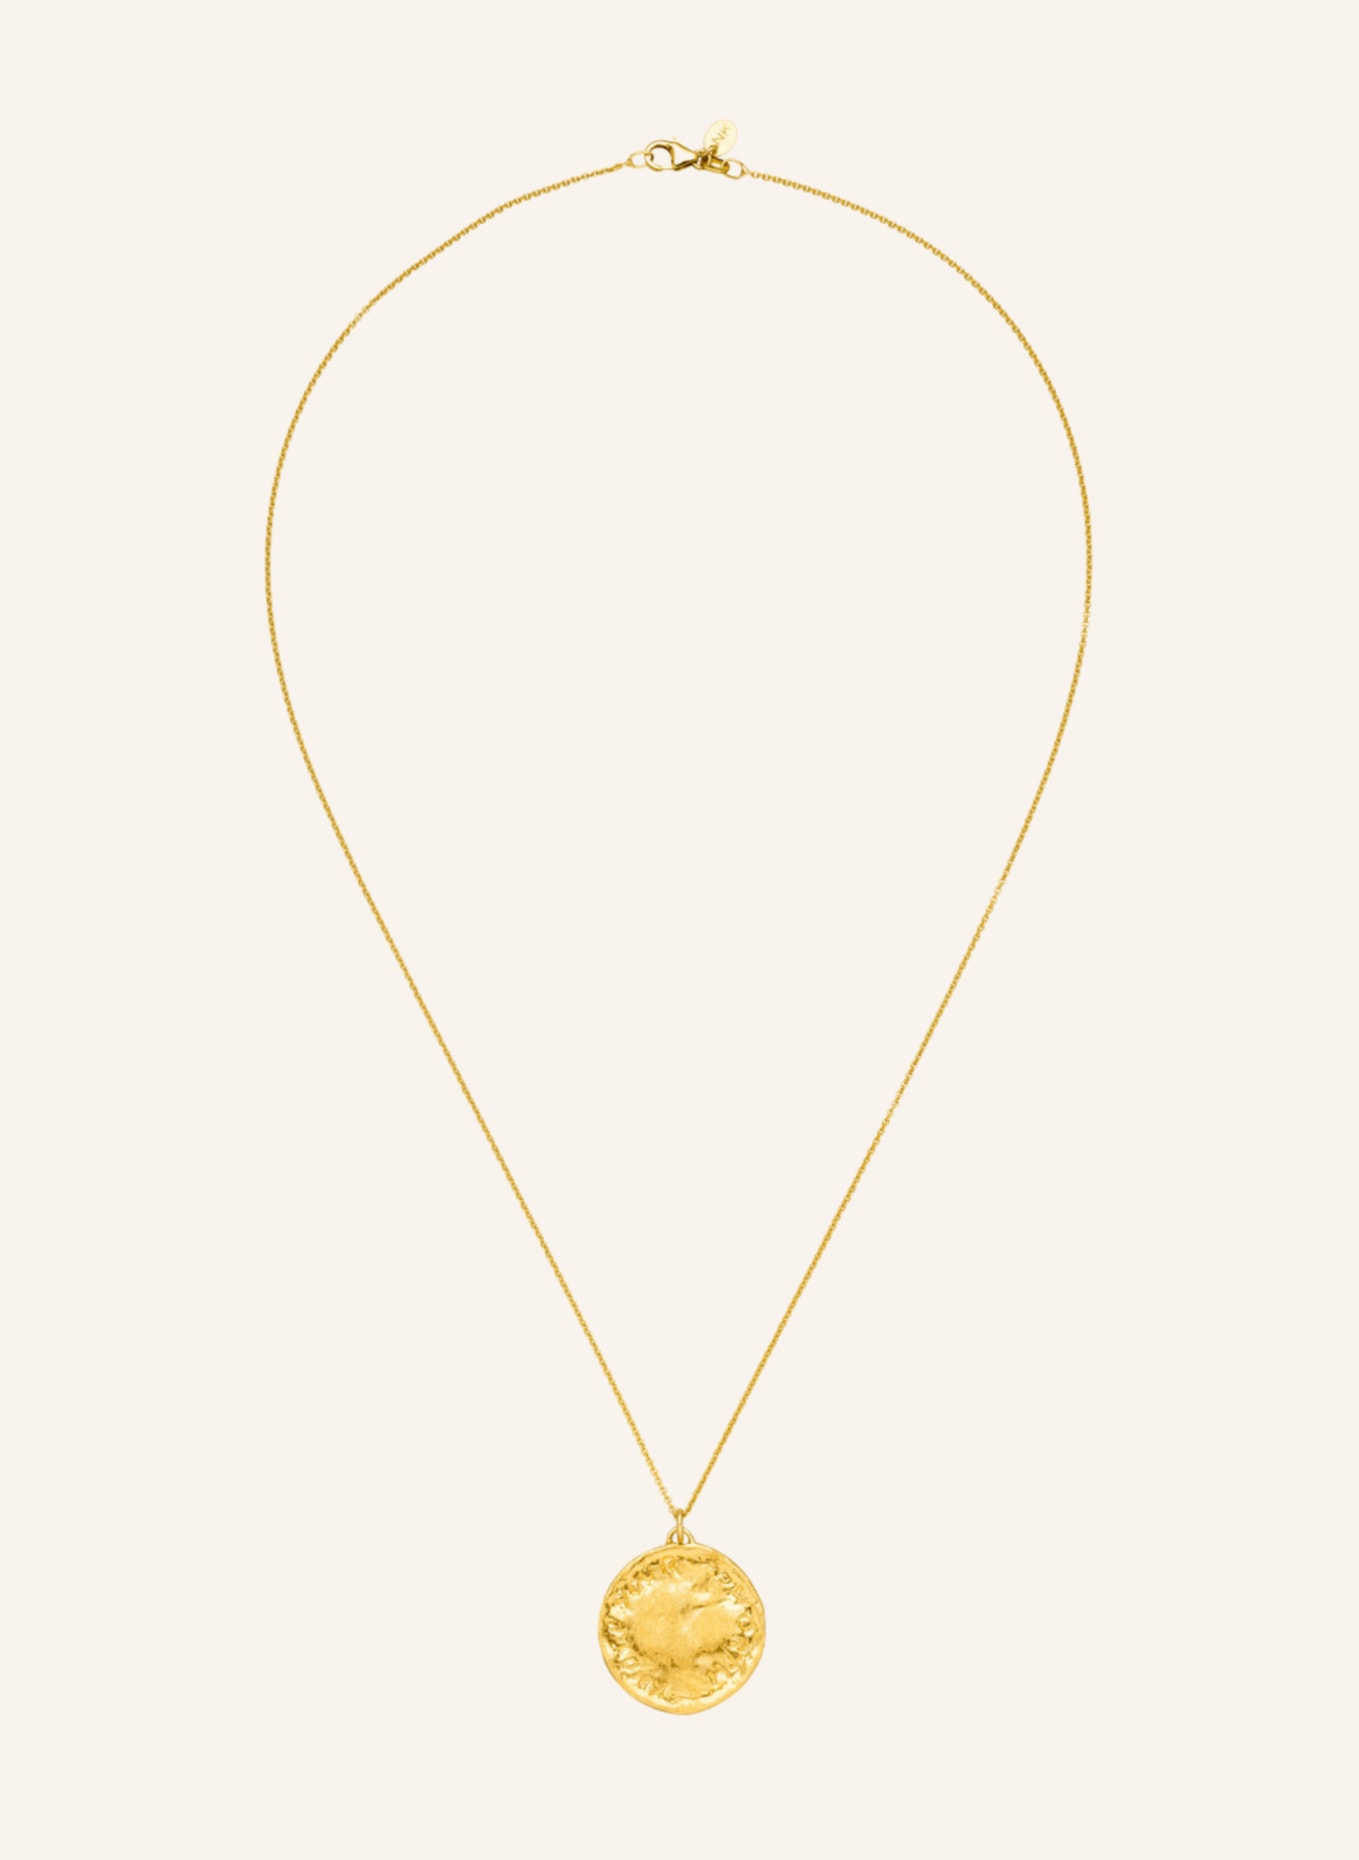 NINA KASTENS Kette WORTH IT NECKLACE by GLAMBOU, Farbe: GOLD (Bild 1)